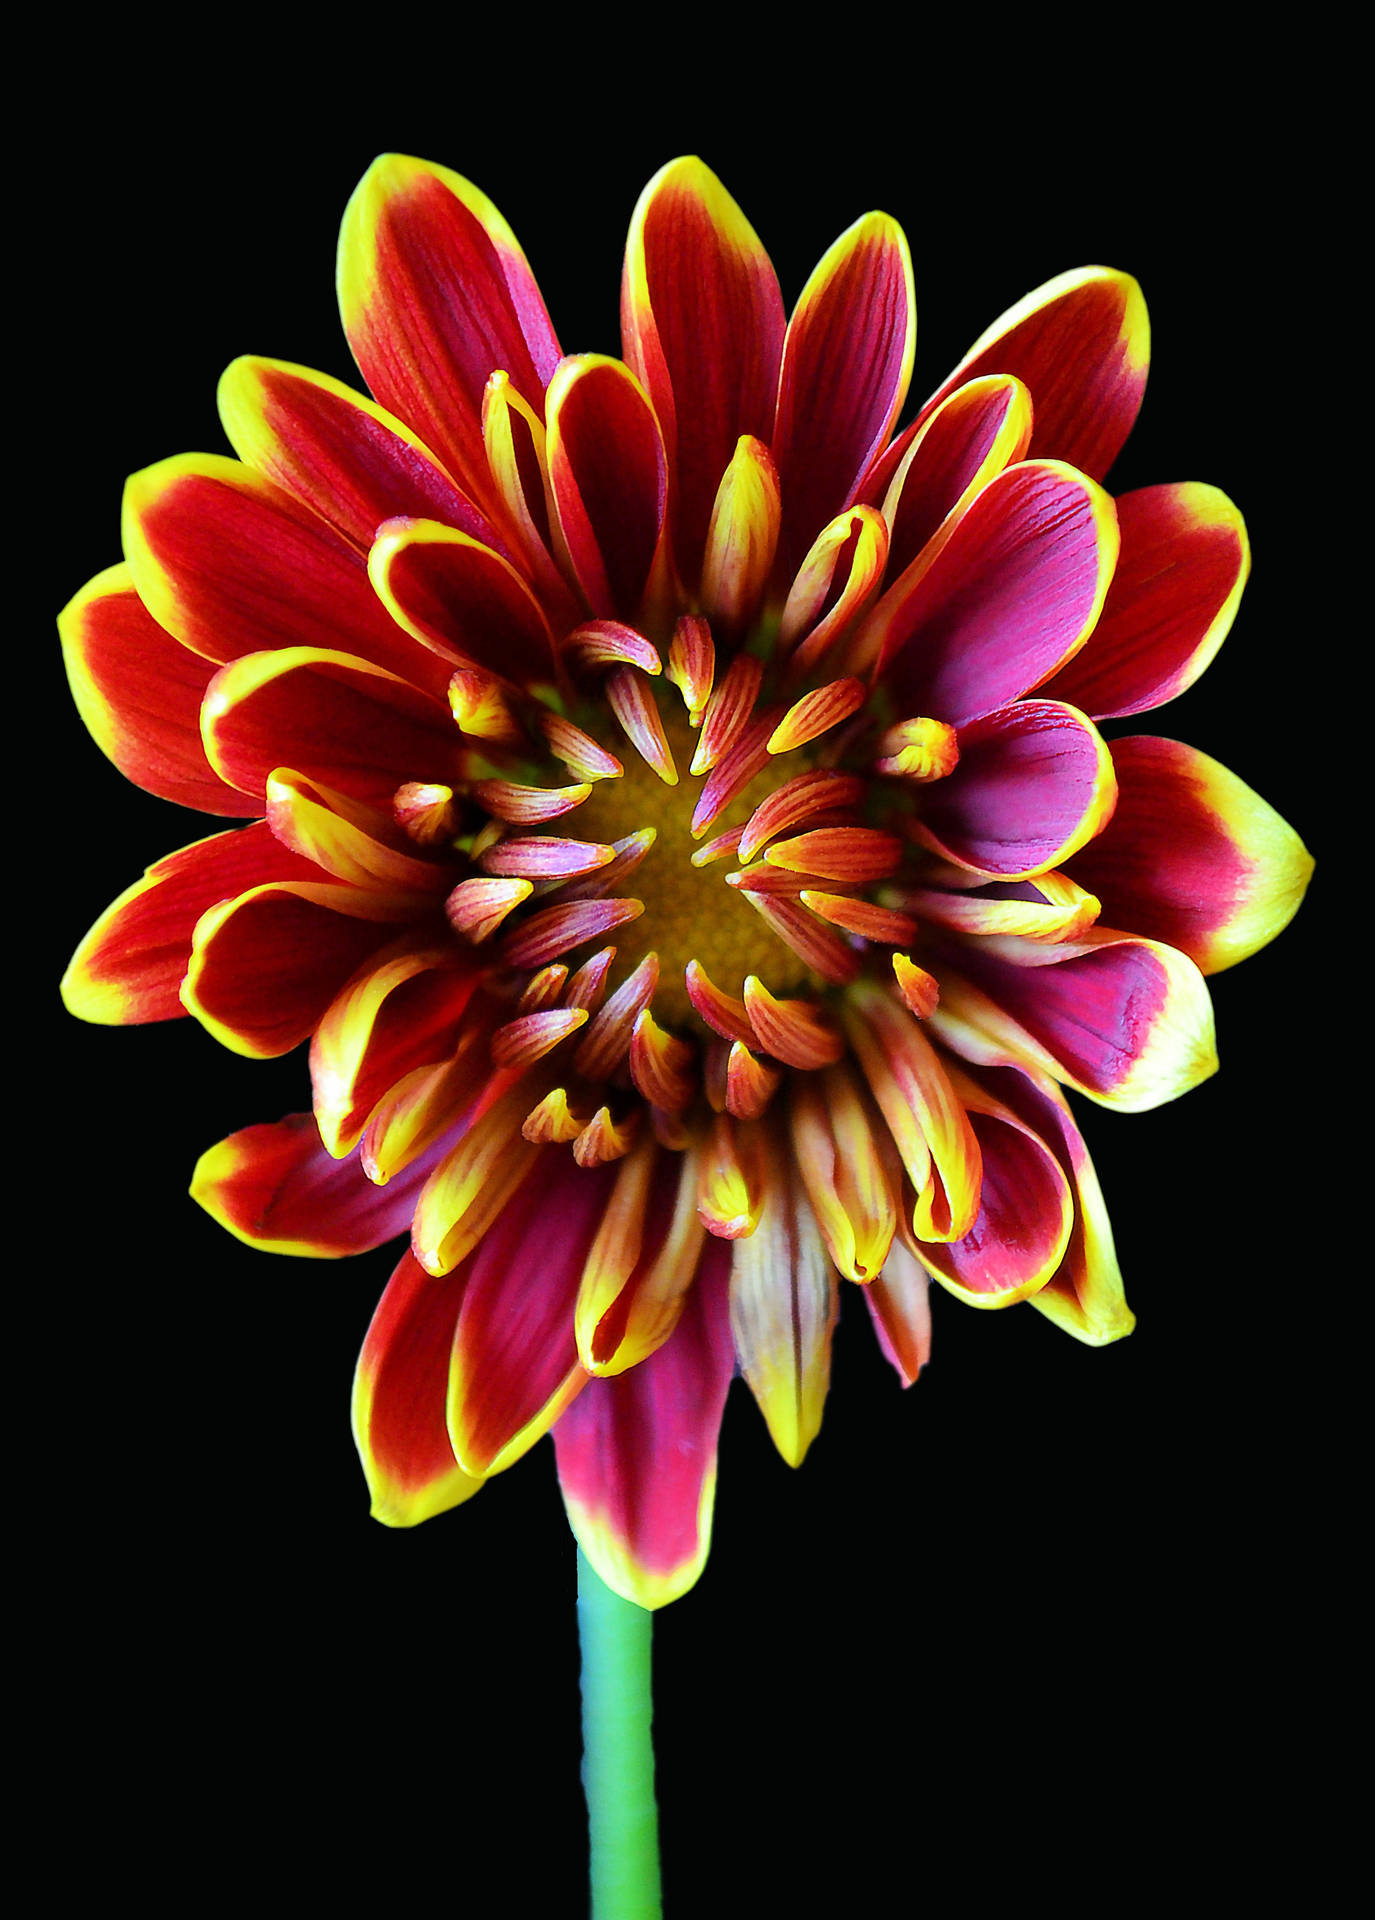 Red Dahlia Flower Android Wallpaper